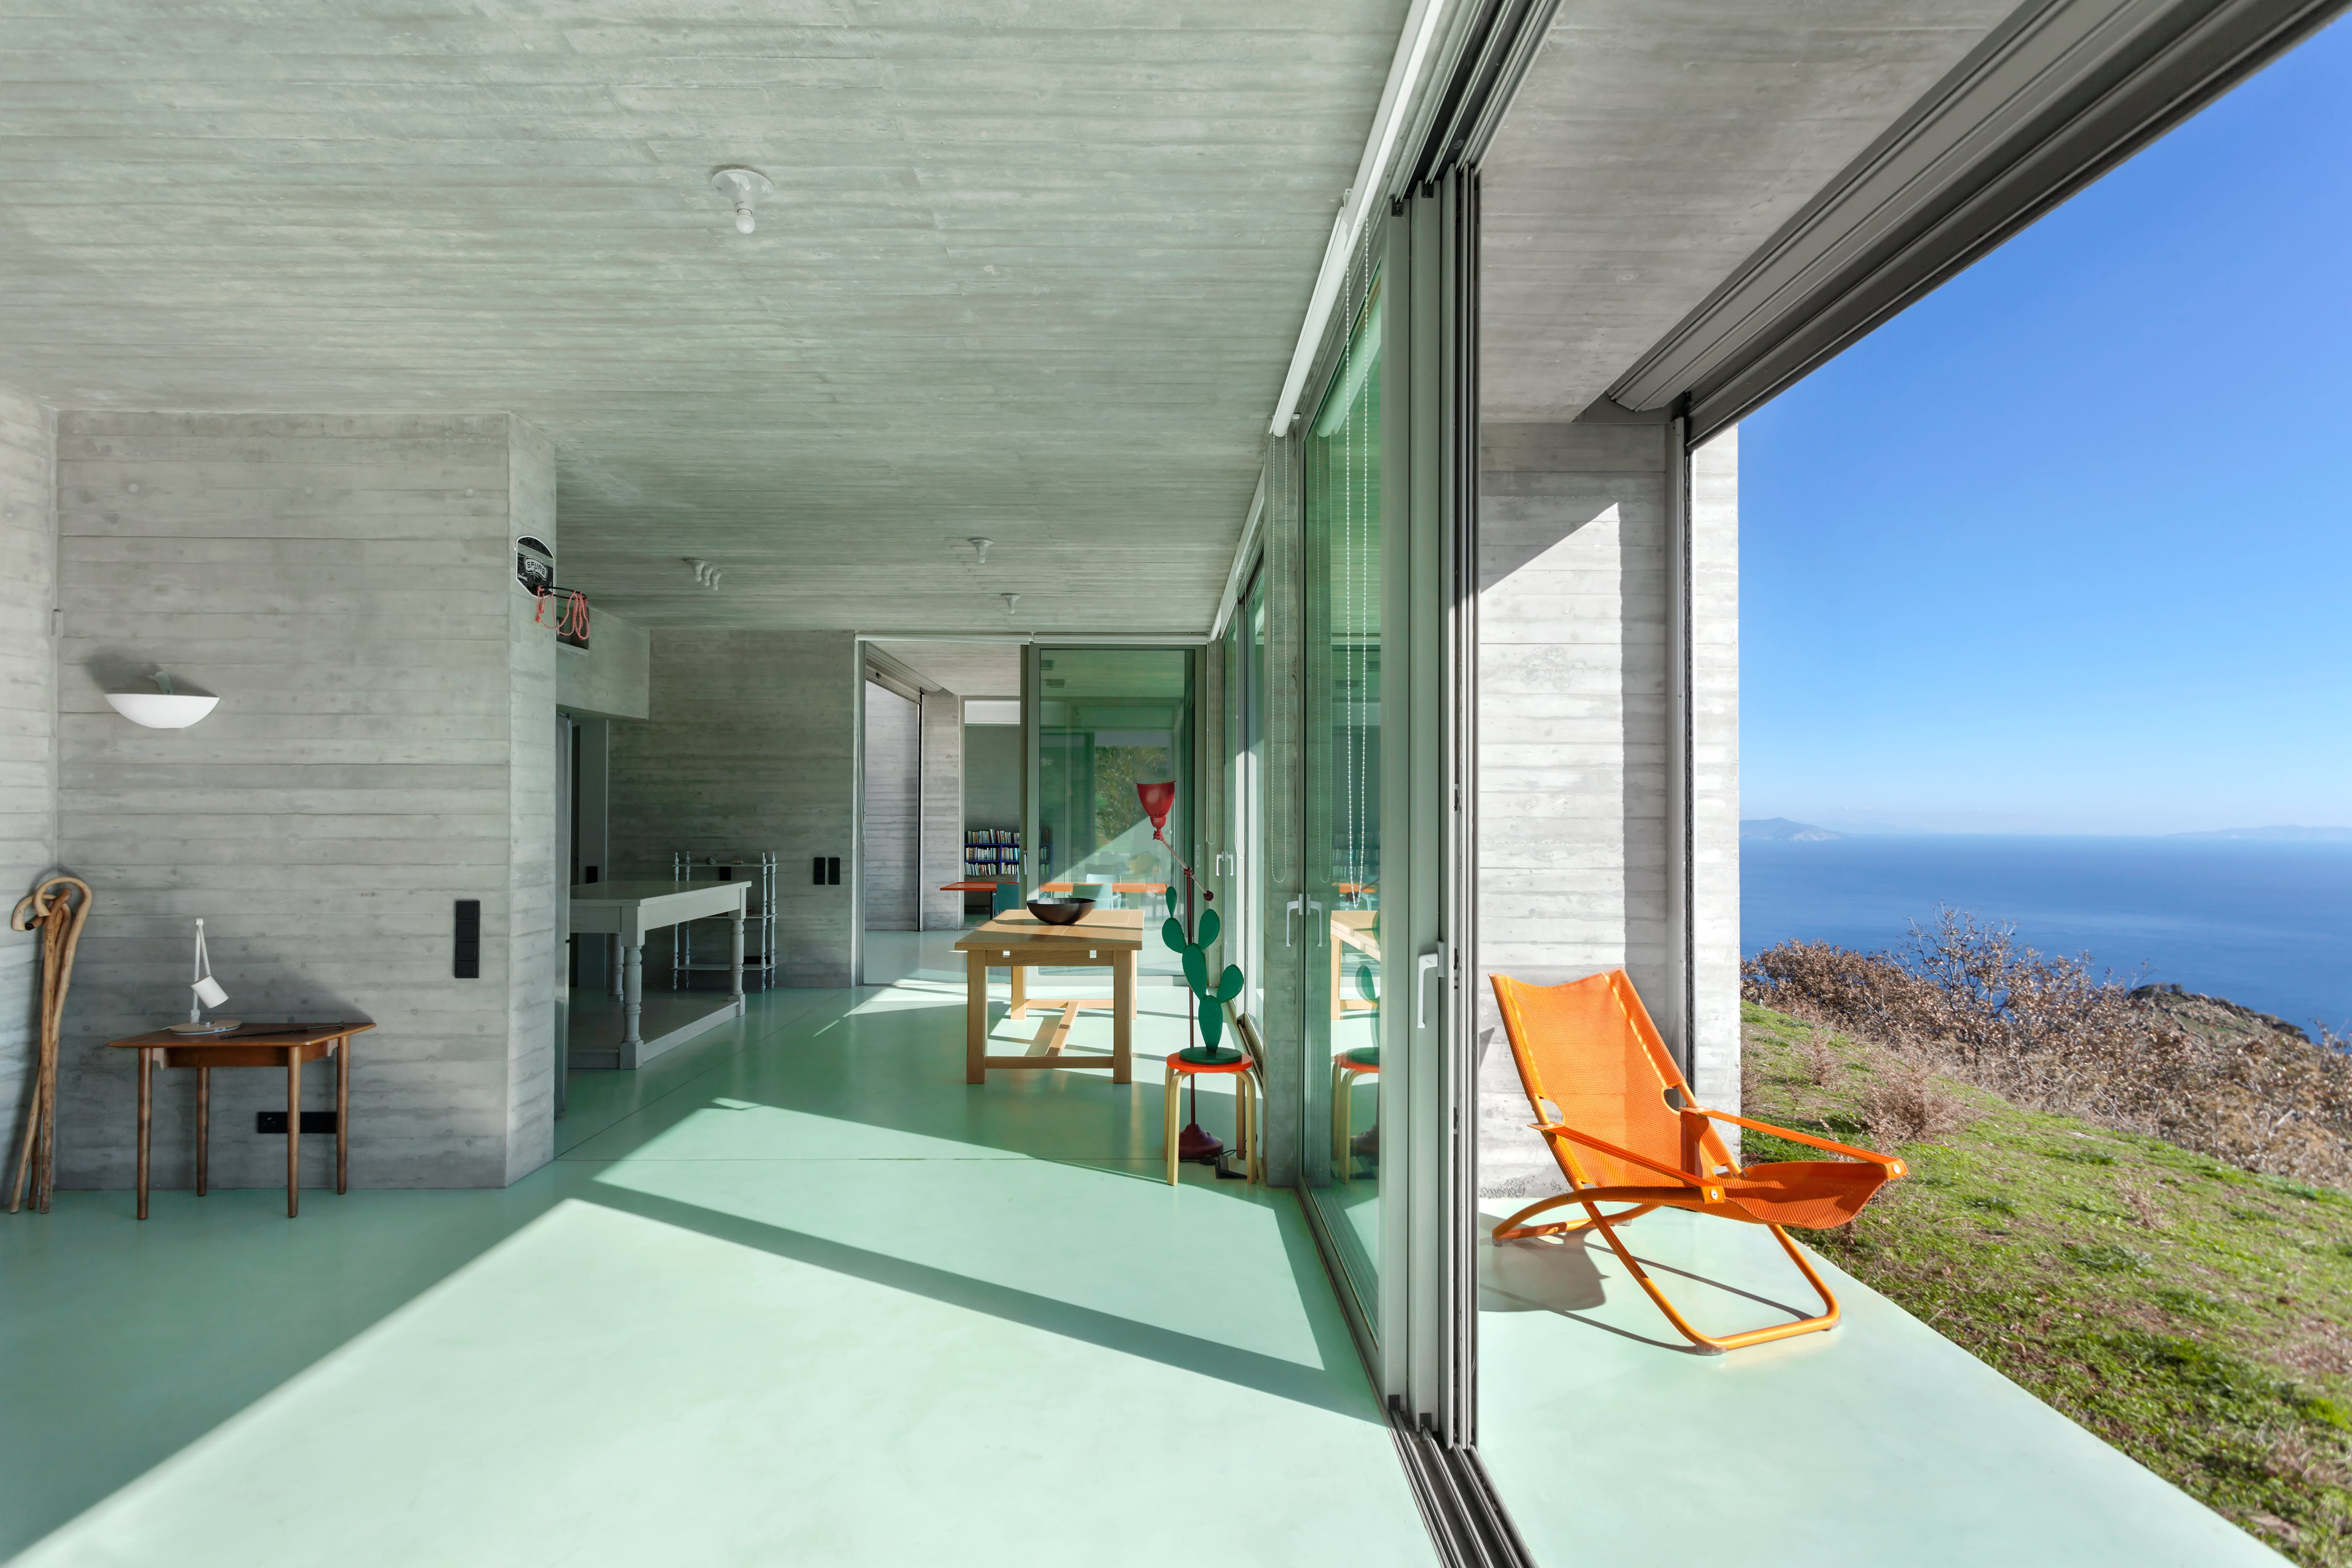 The harmonization of exposed concrete and bright green enliven the holiday atmosphere